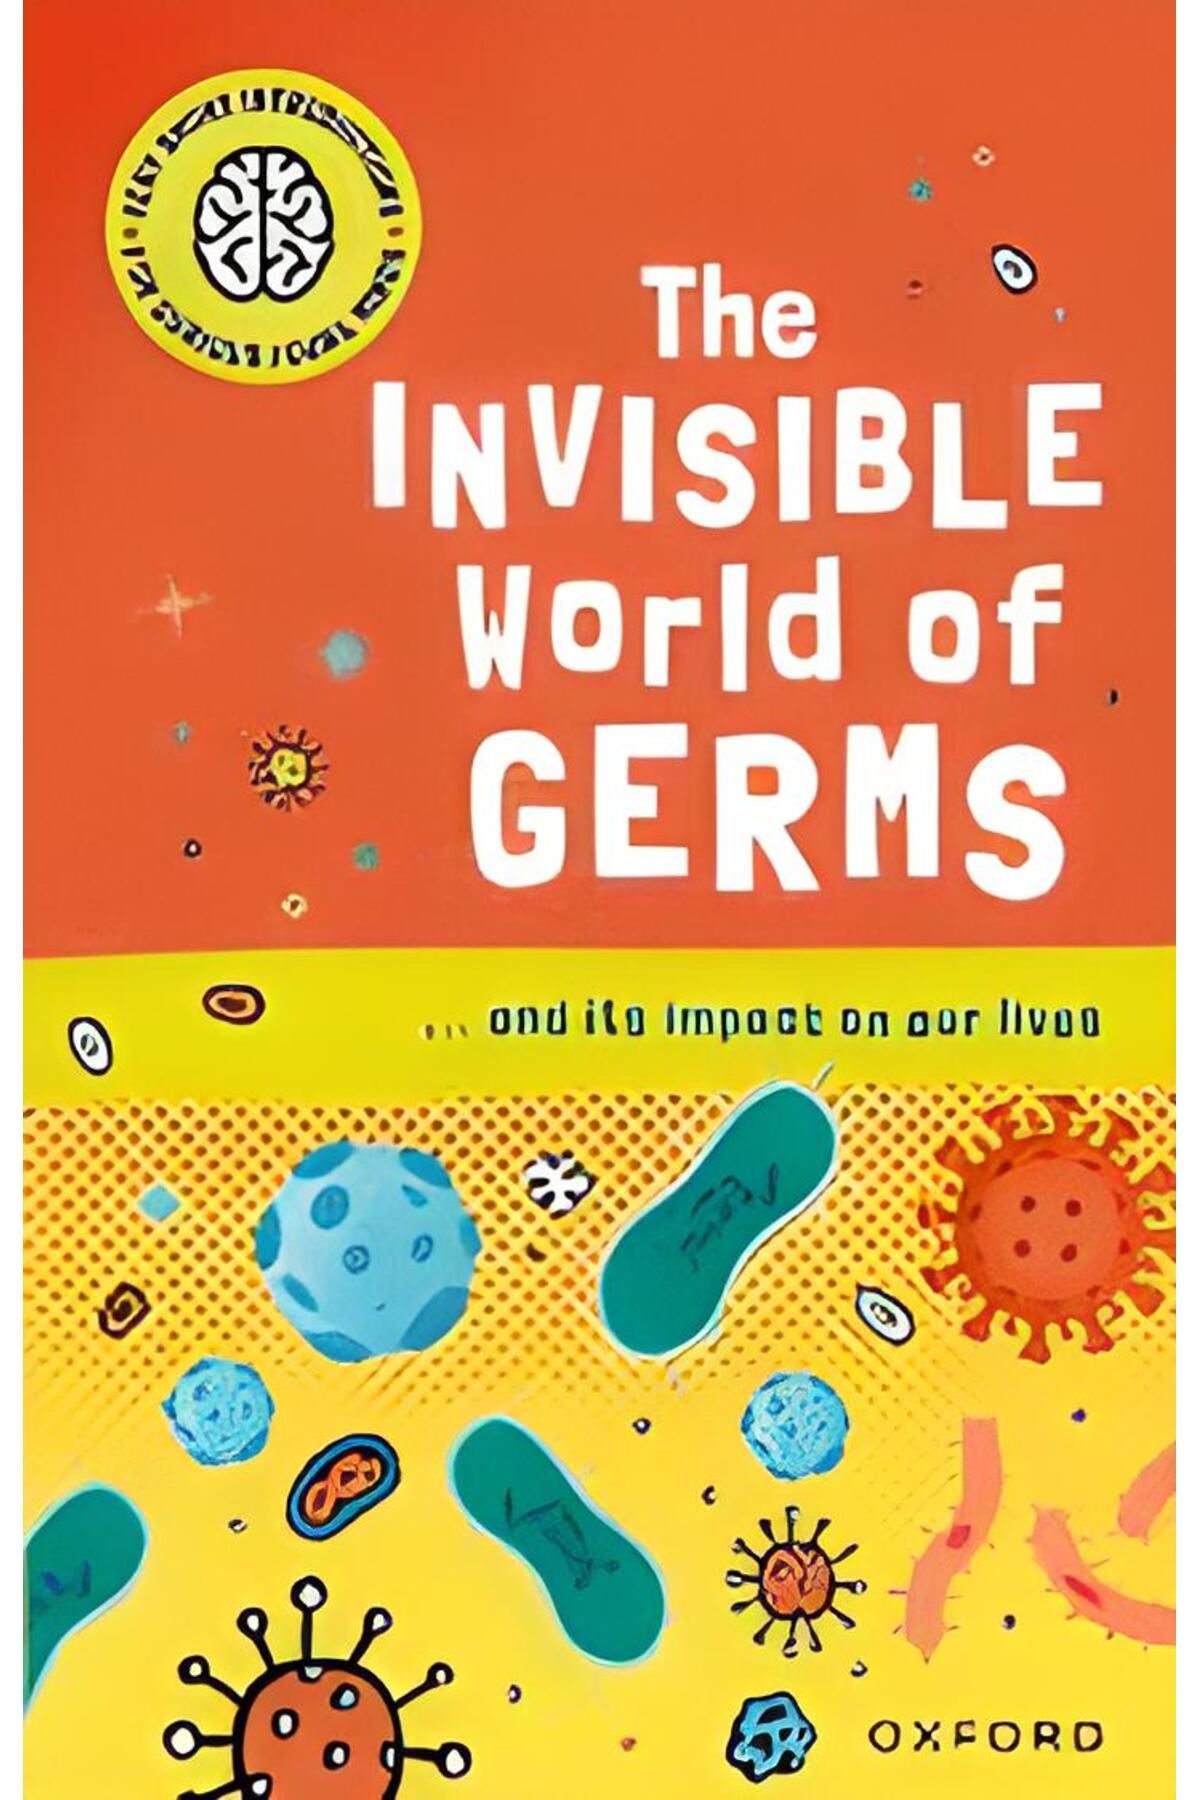 OXFORD UNIVERSITY PRESS The Invisible World of Germs - Very Short Introductions for Curious Young Minds